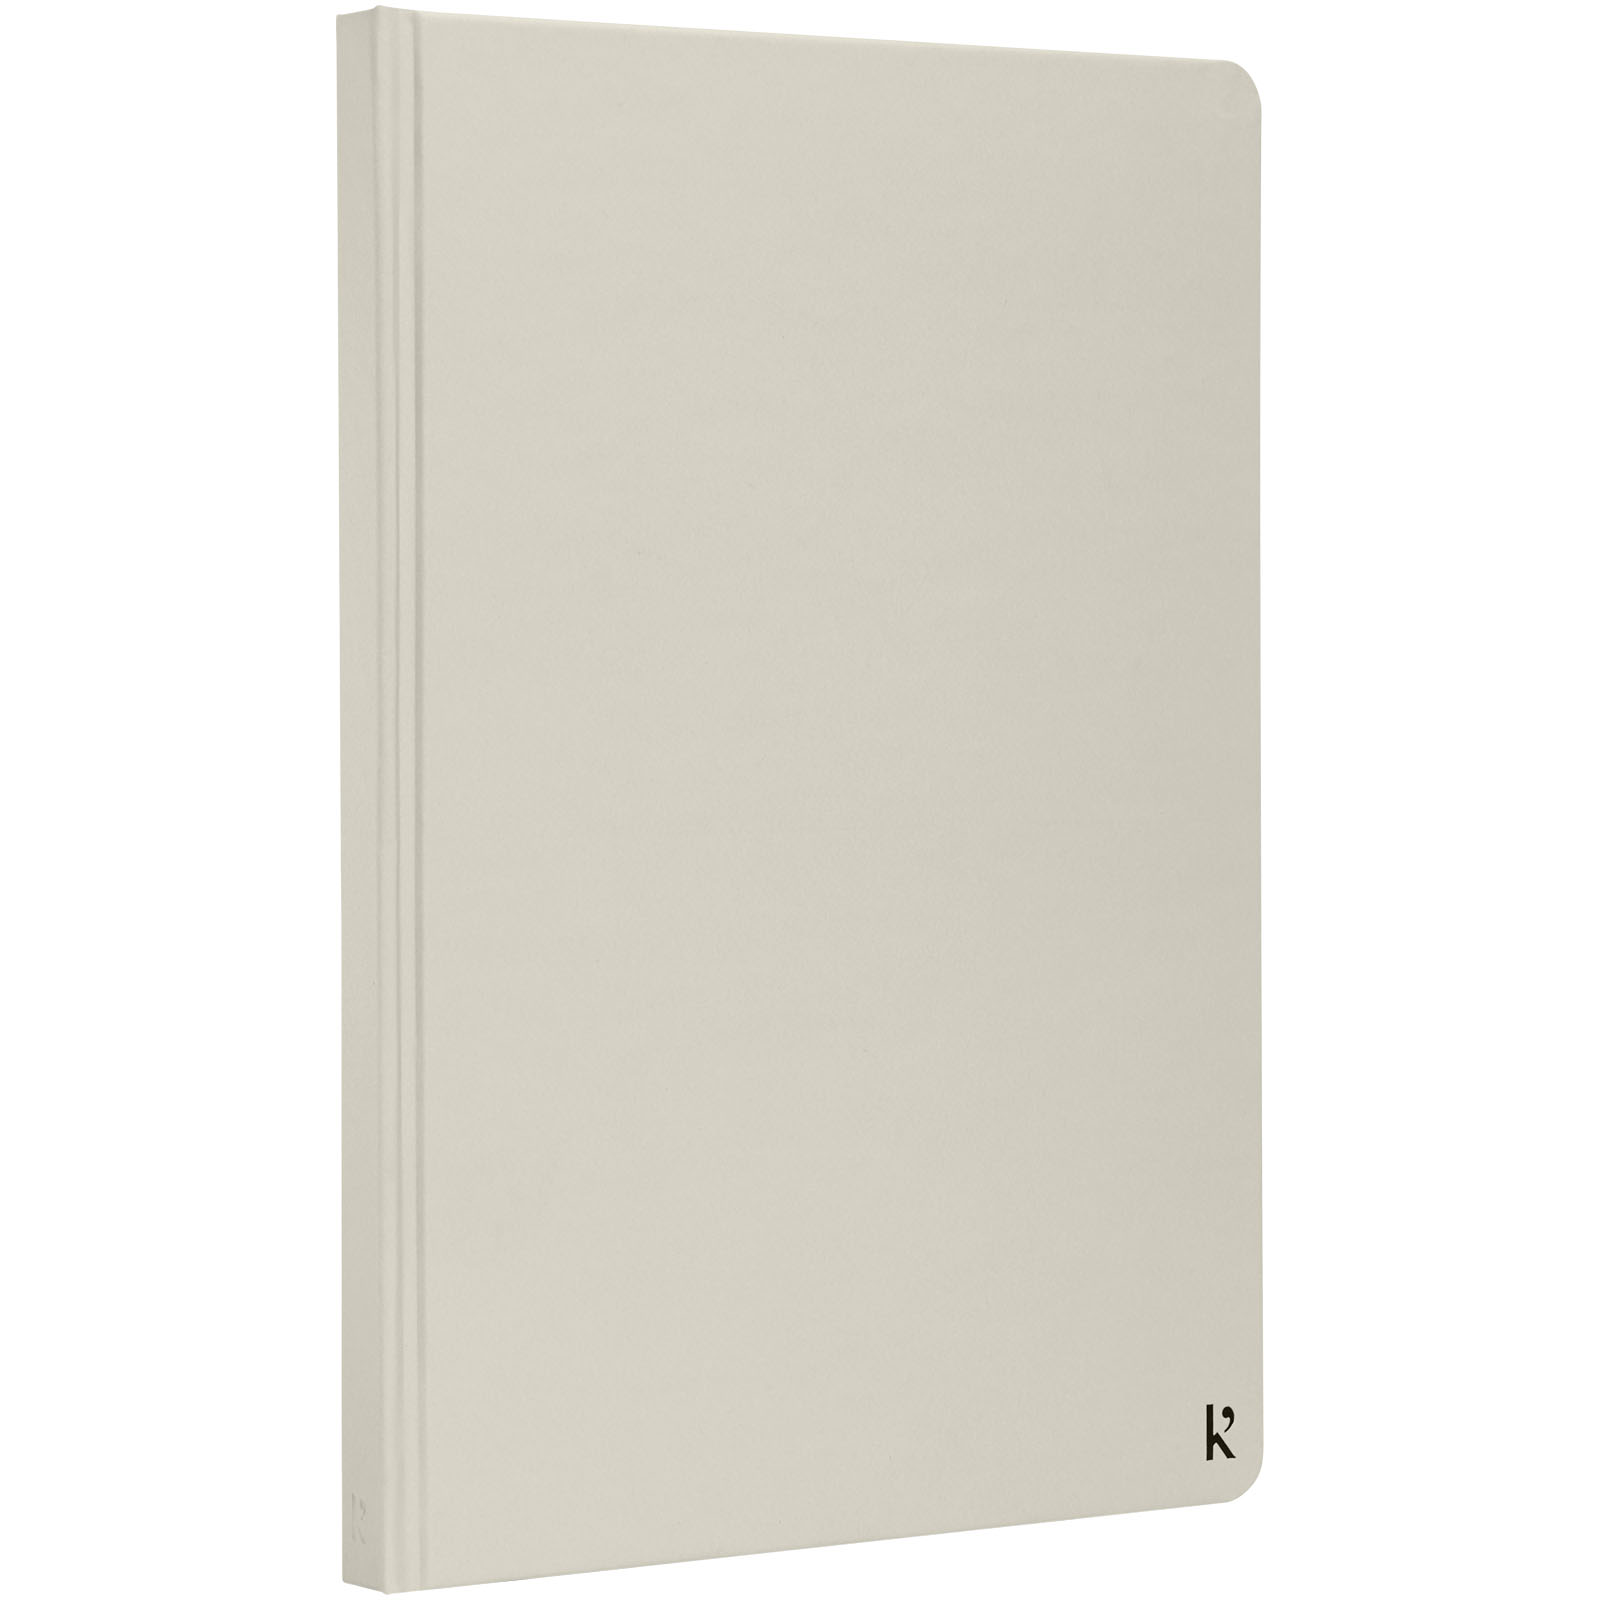 Advertising Hard cover notebooks - Karst® A5 stone paper hardcover notebook - lined